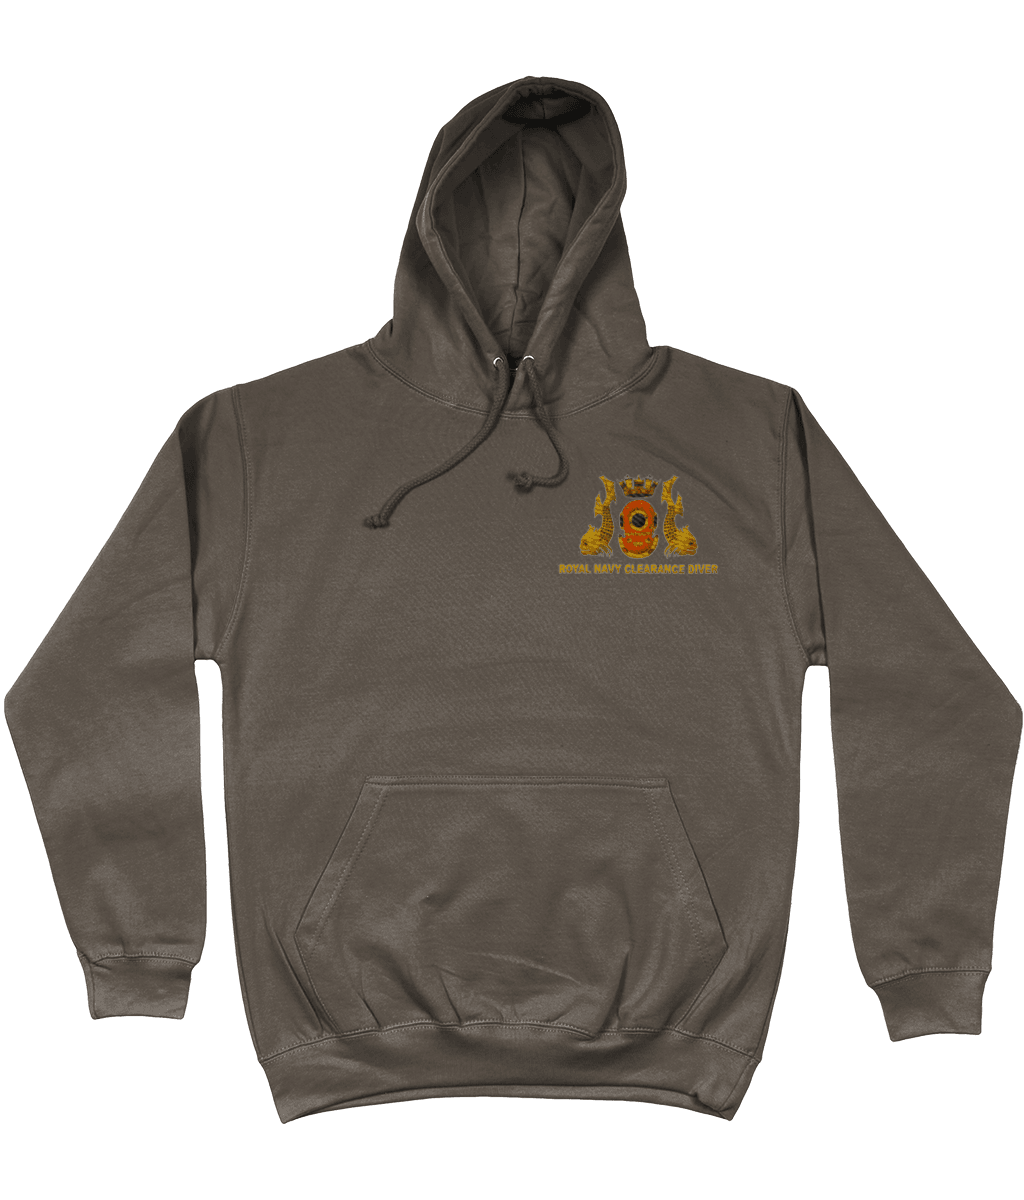 Royal Navy Clearance Diver  Embroidered AWDis Hoodie - Divers Gifts